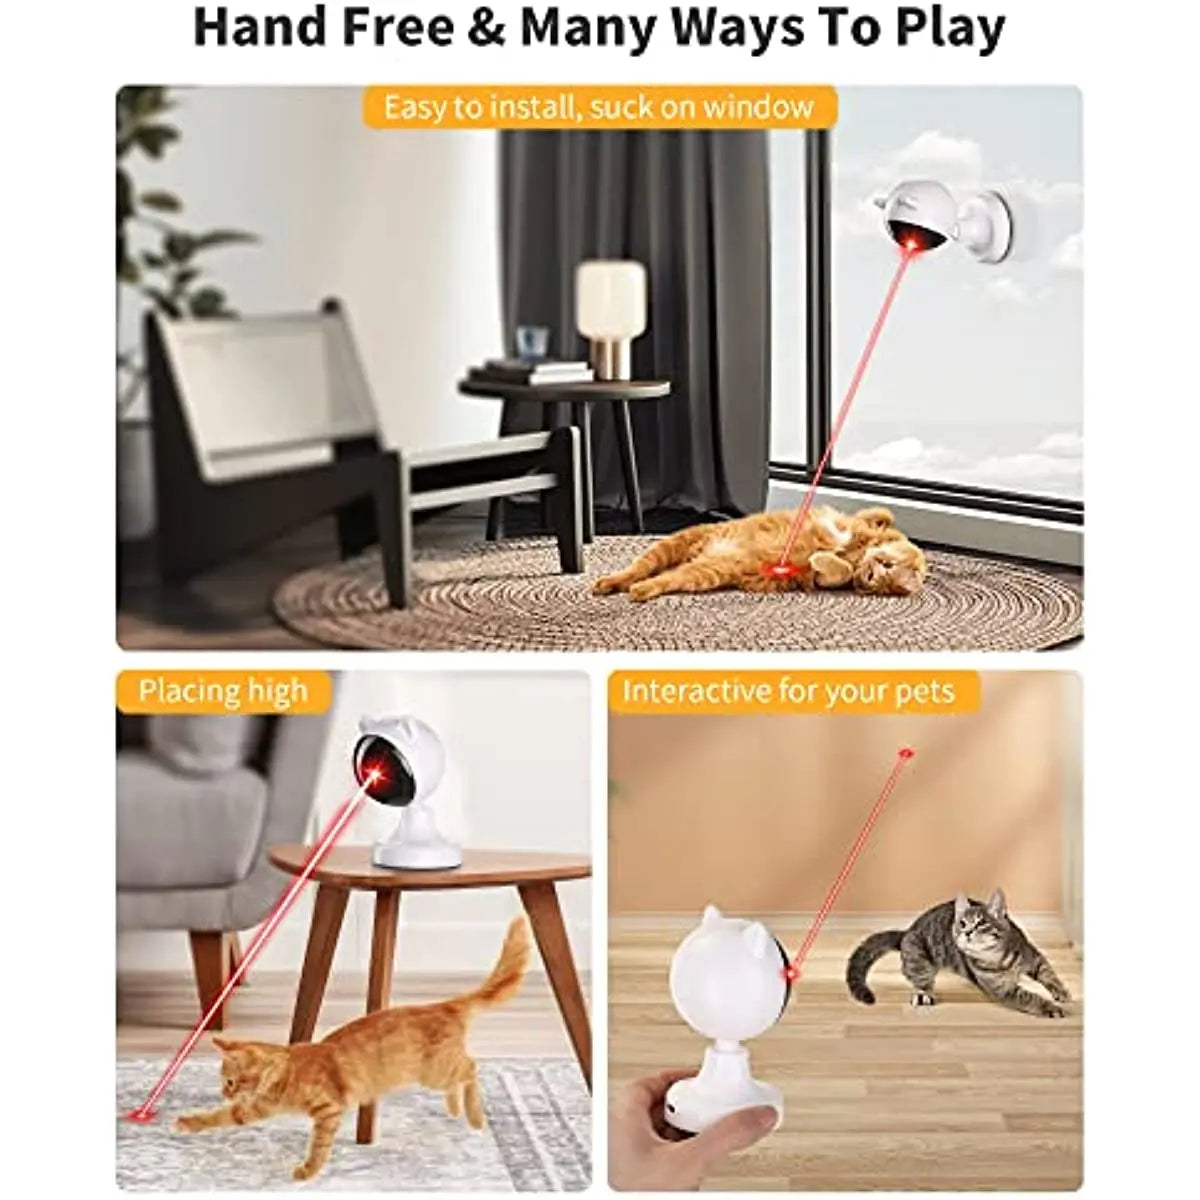 Automatic Laser Cat Toy - USB Rechargeable